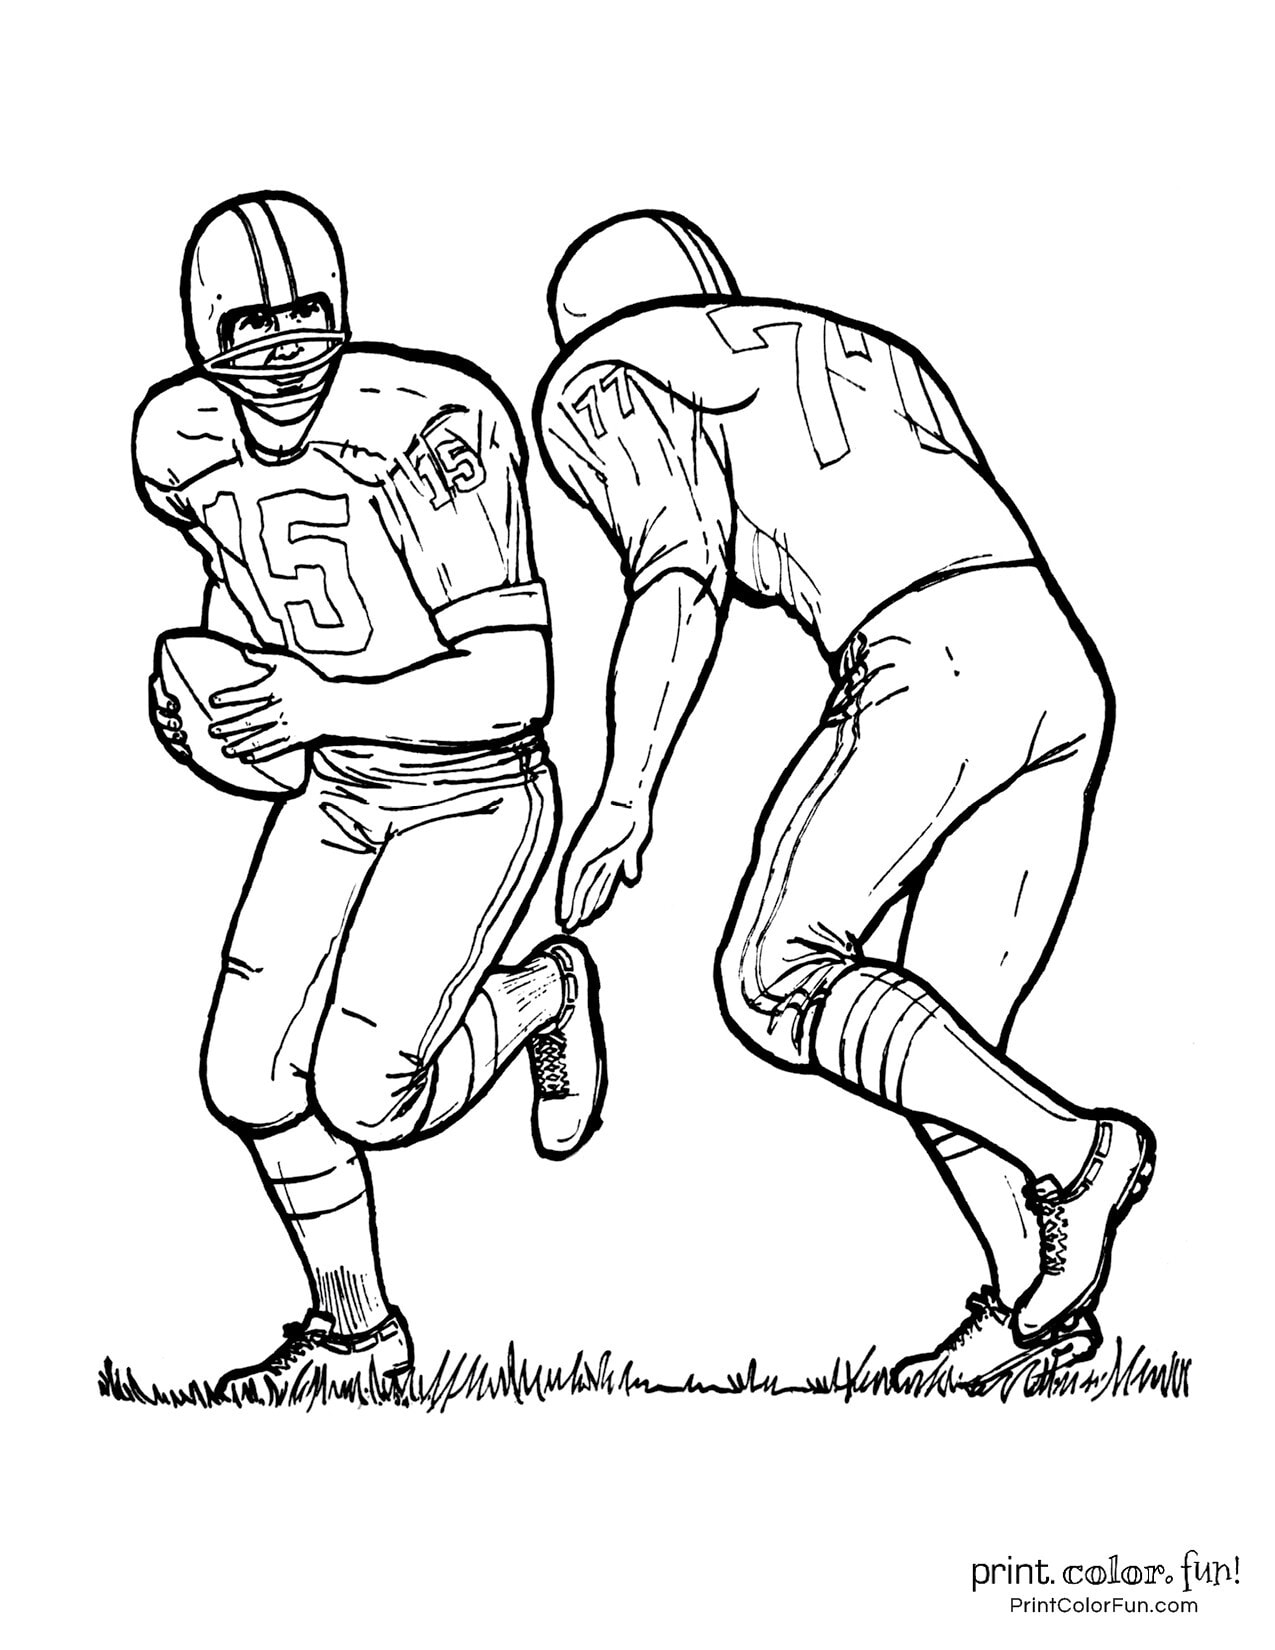 14 football player coloring pages: Free sports printables Print Color